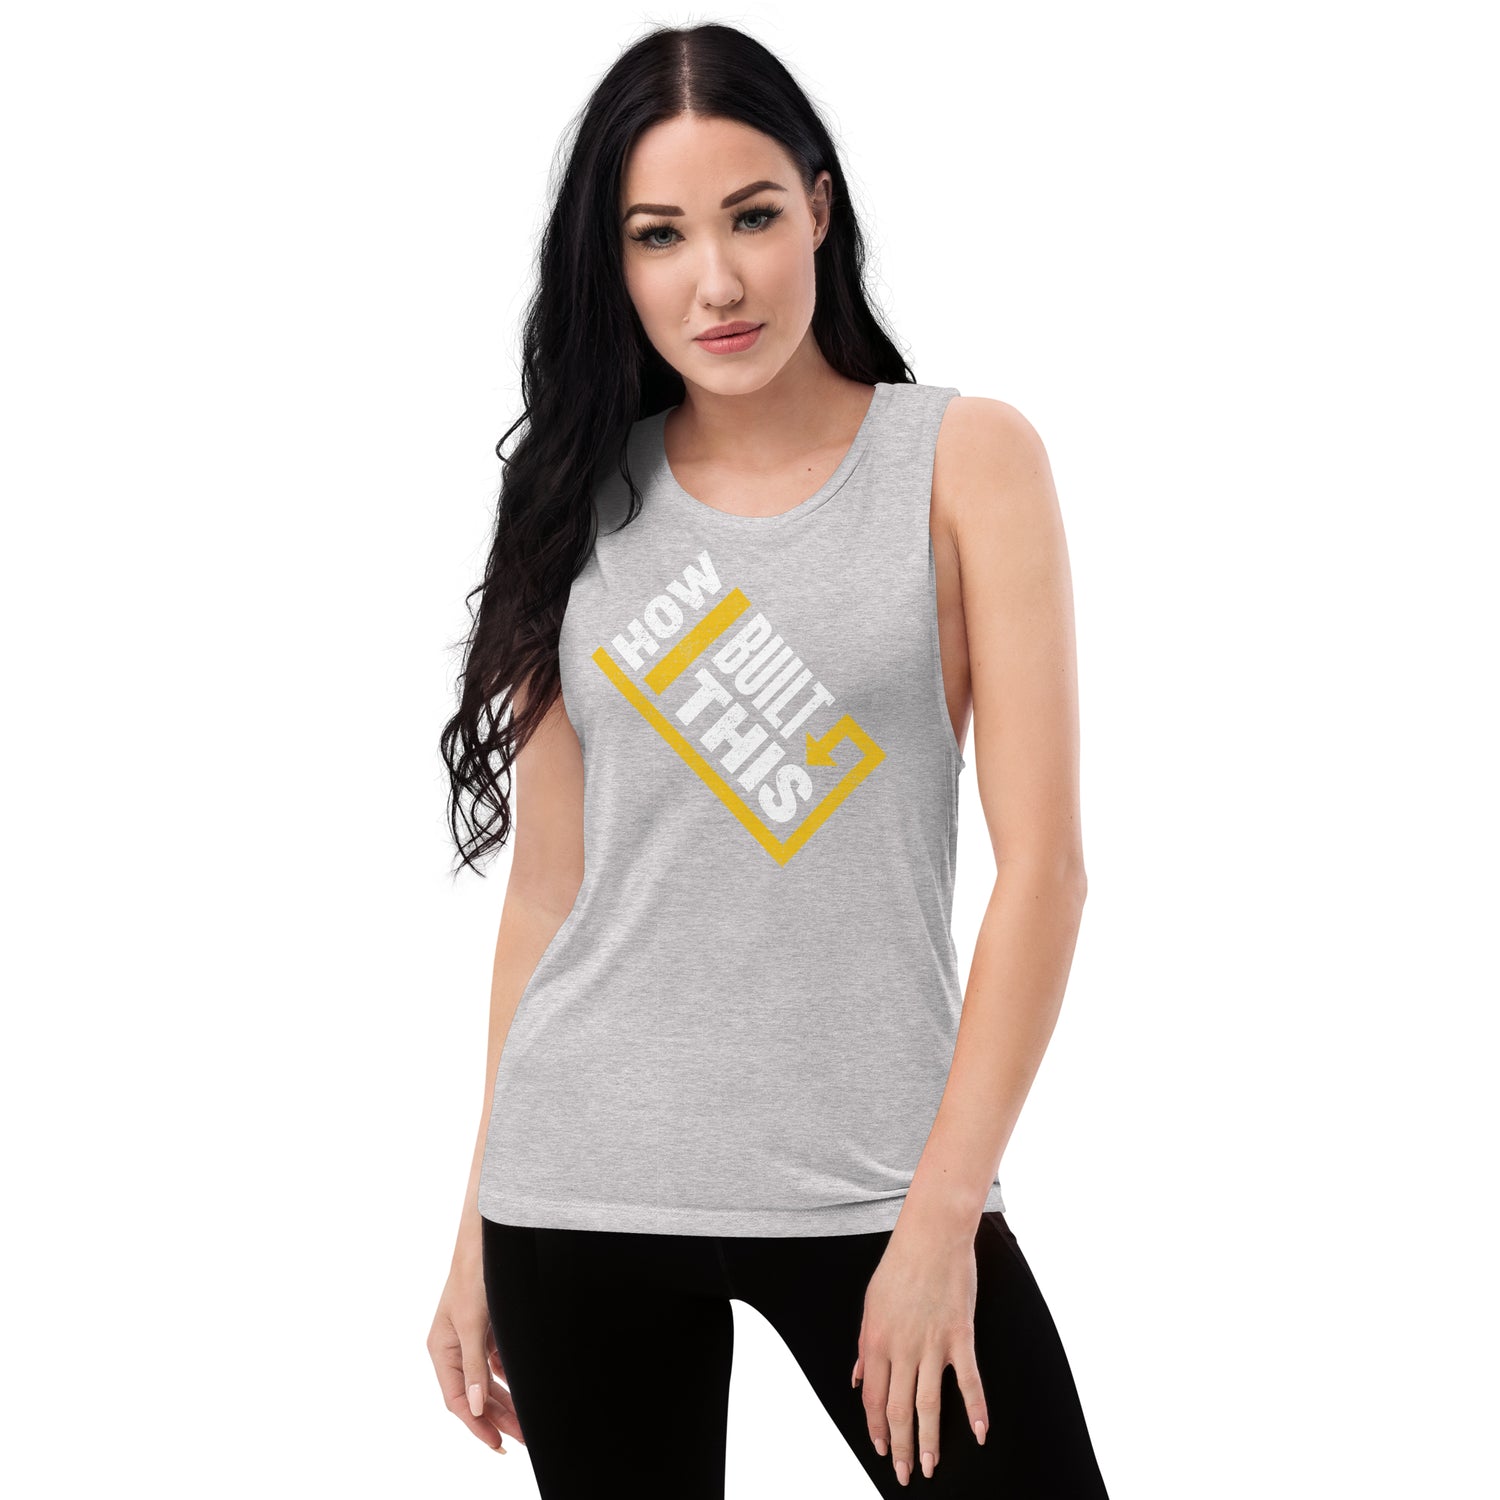 How I Built This Distressed Logo Women's Muscle Tank